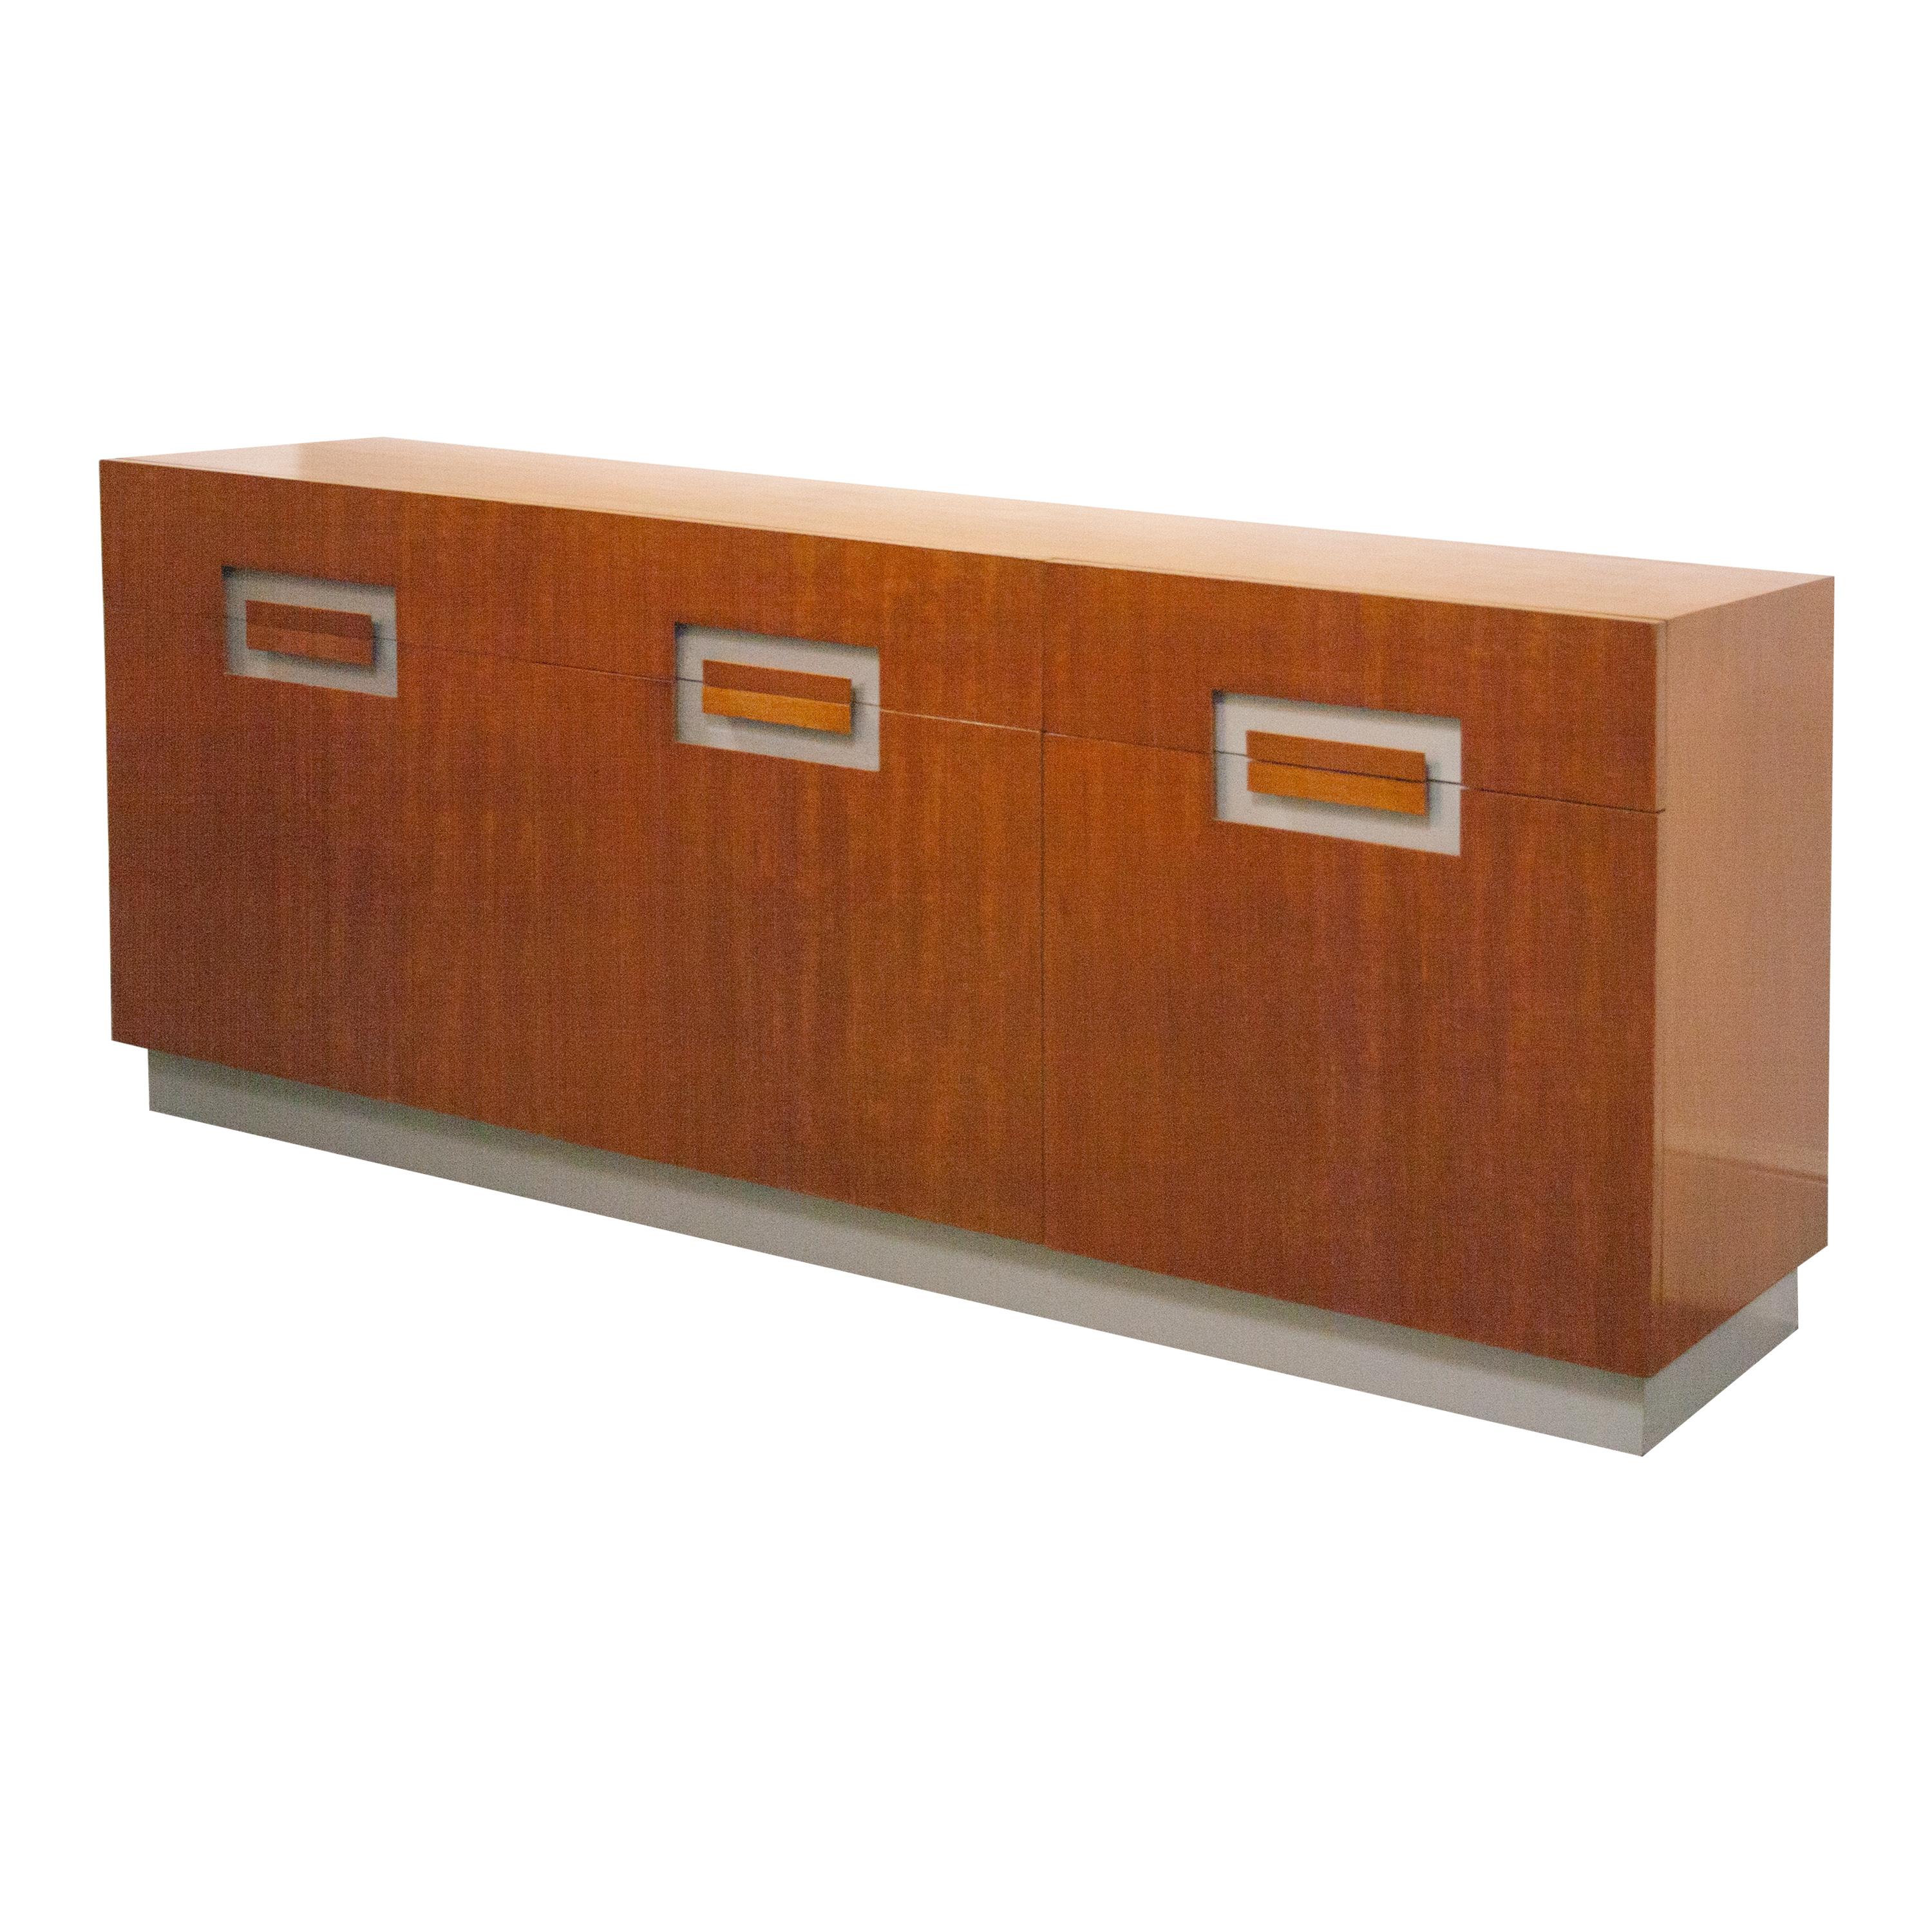 Italian sideboard with three doors, shelving and drawers in the style of Willy Rizzo. Made in Mahogany with handles milled in doors with white details.